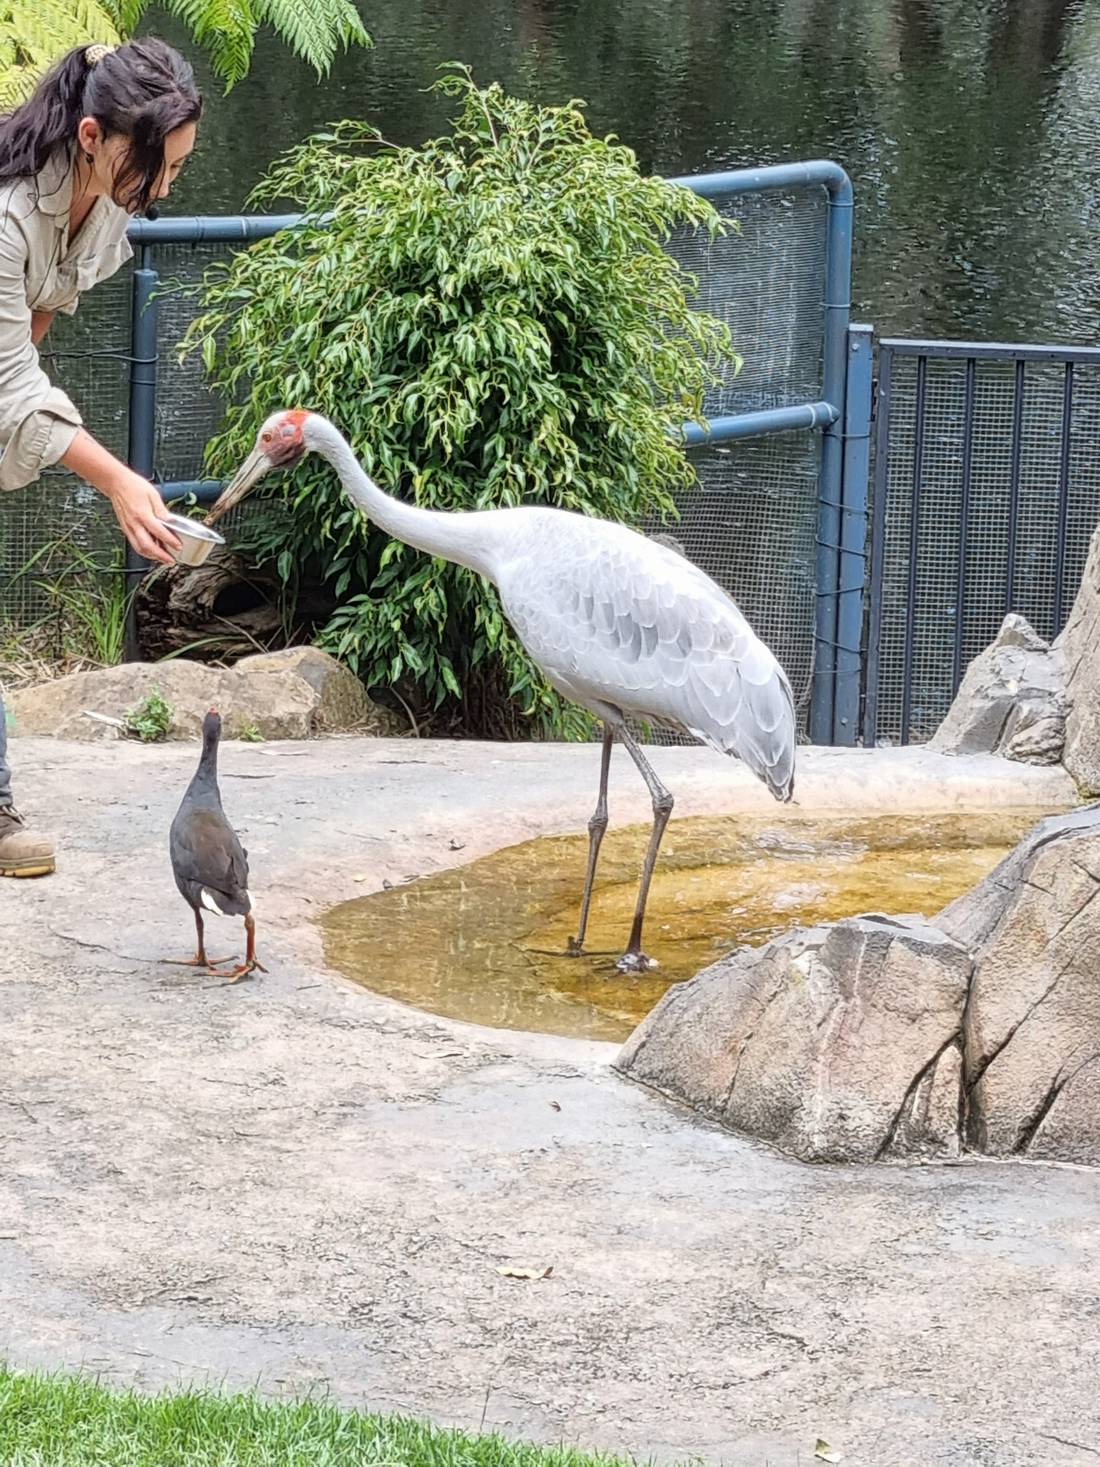 A North Territory Brolga being fed by the handler, and a Dusky Moorhen trying to steal some feed.